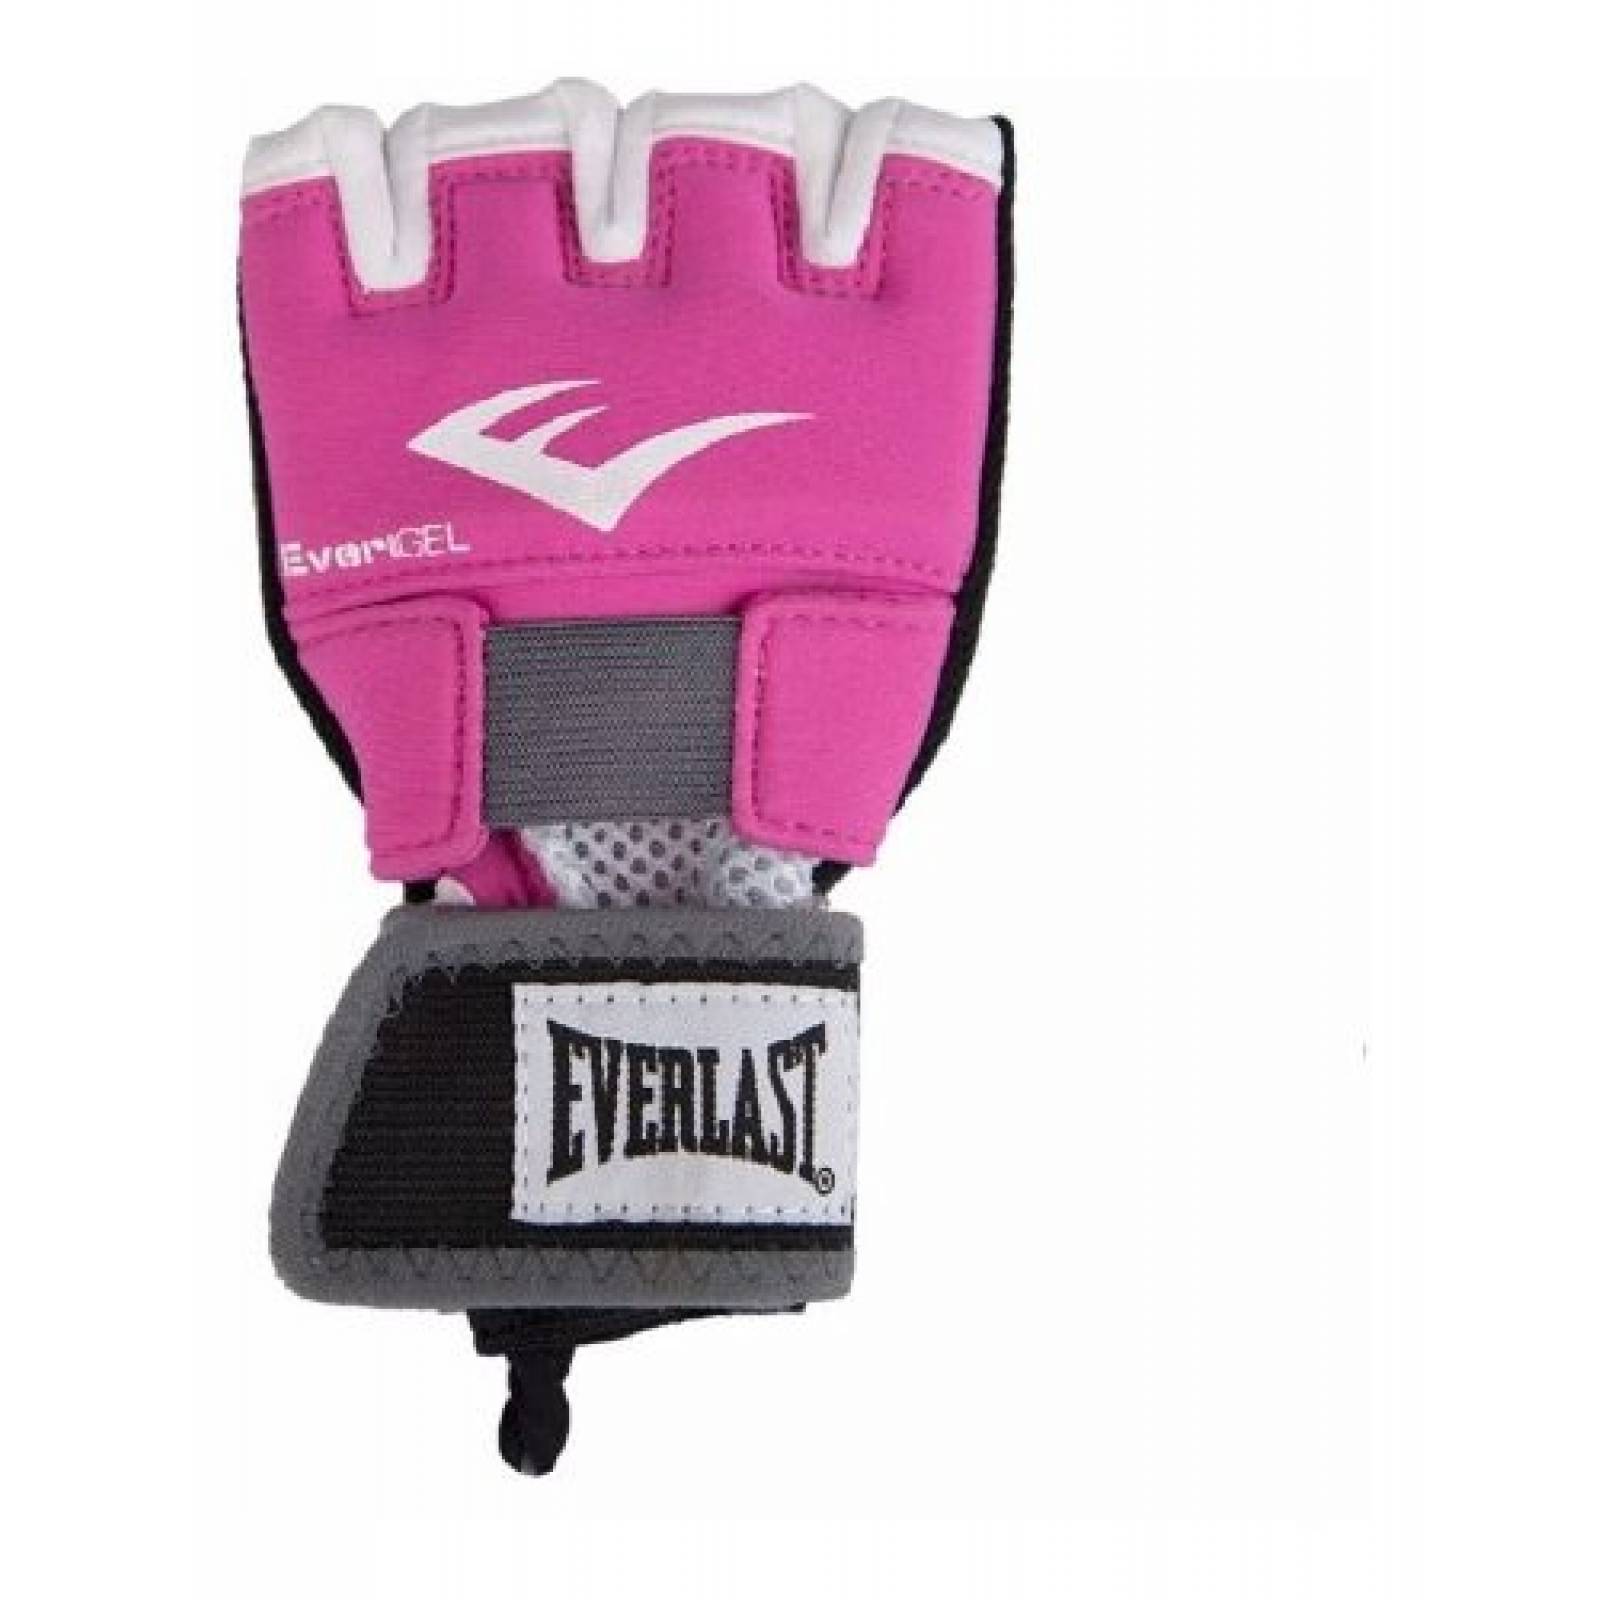 GUANTES EVERGEL ROSA MEDIANO